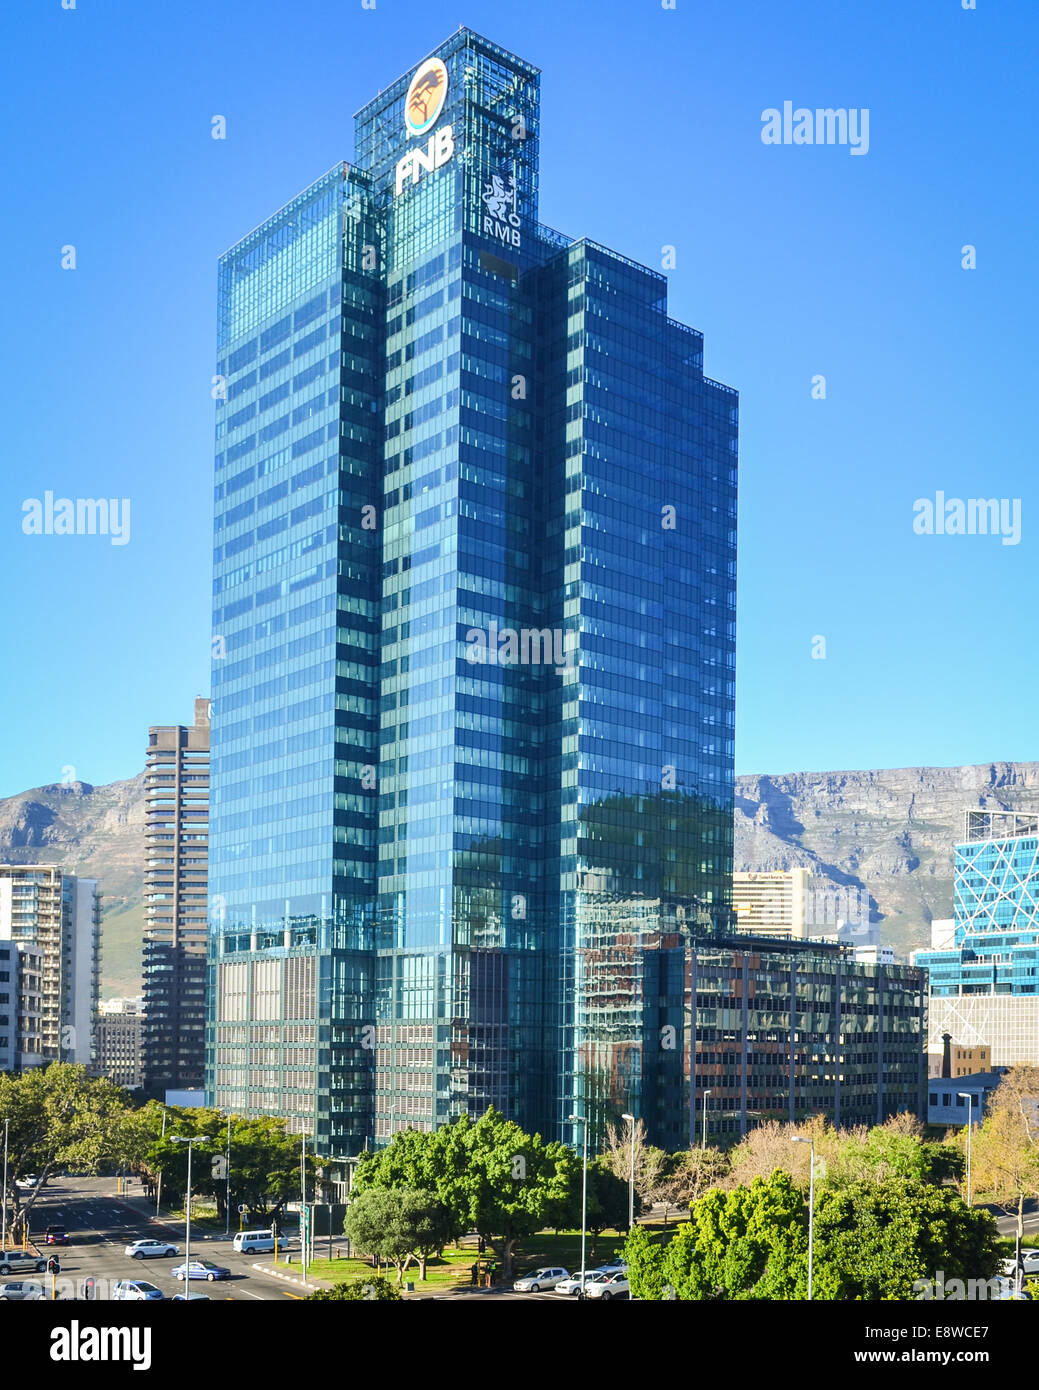 FNB RMB building in the city center of Cape Town, South Africa Stock Photo